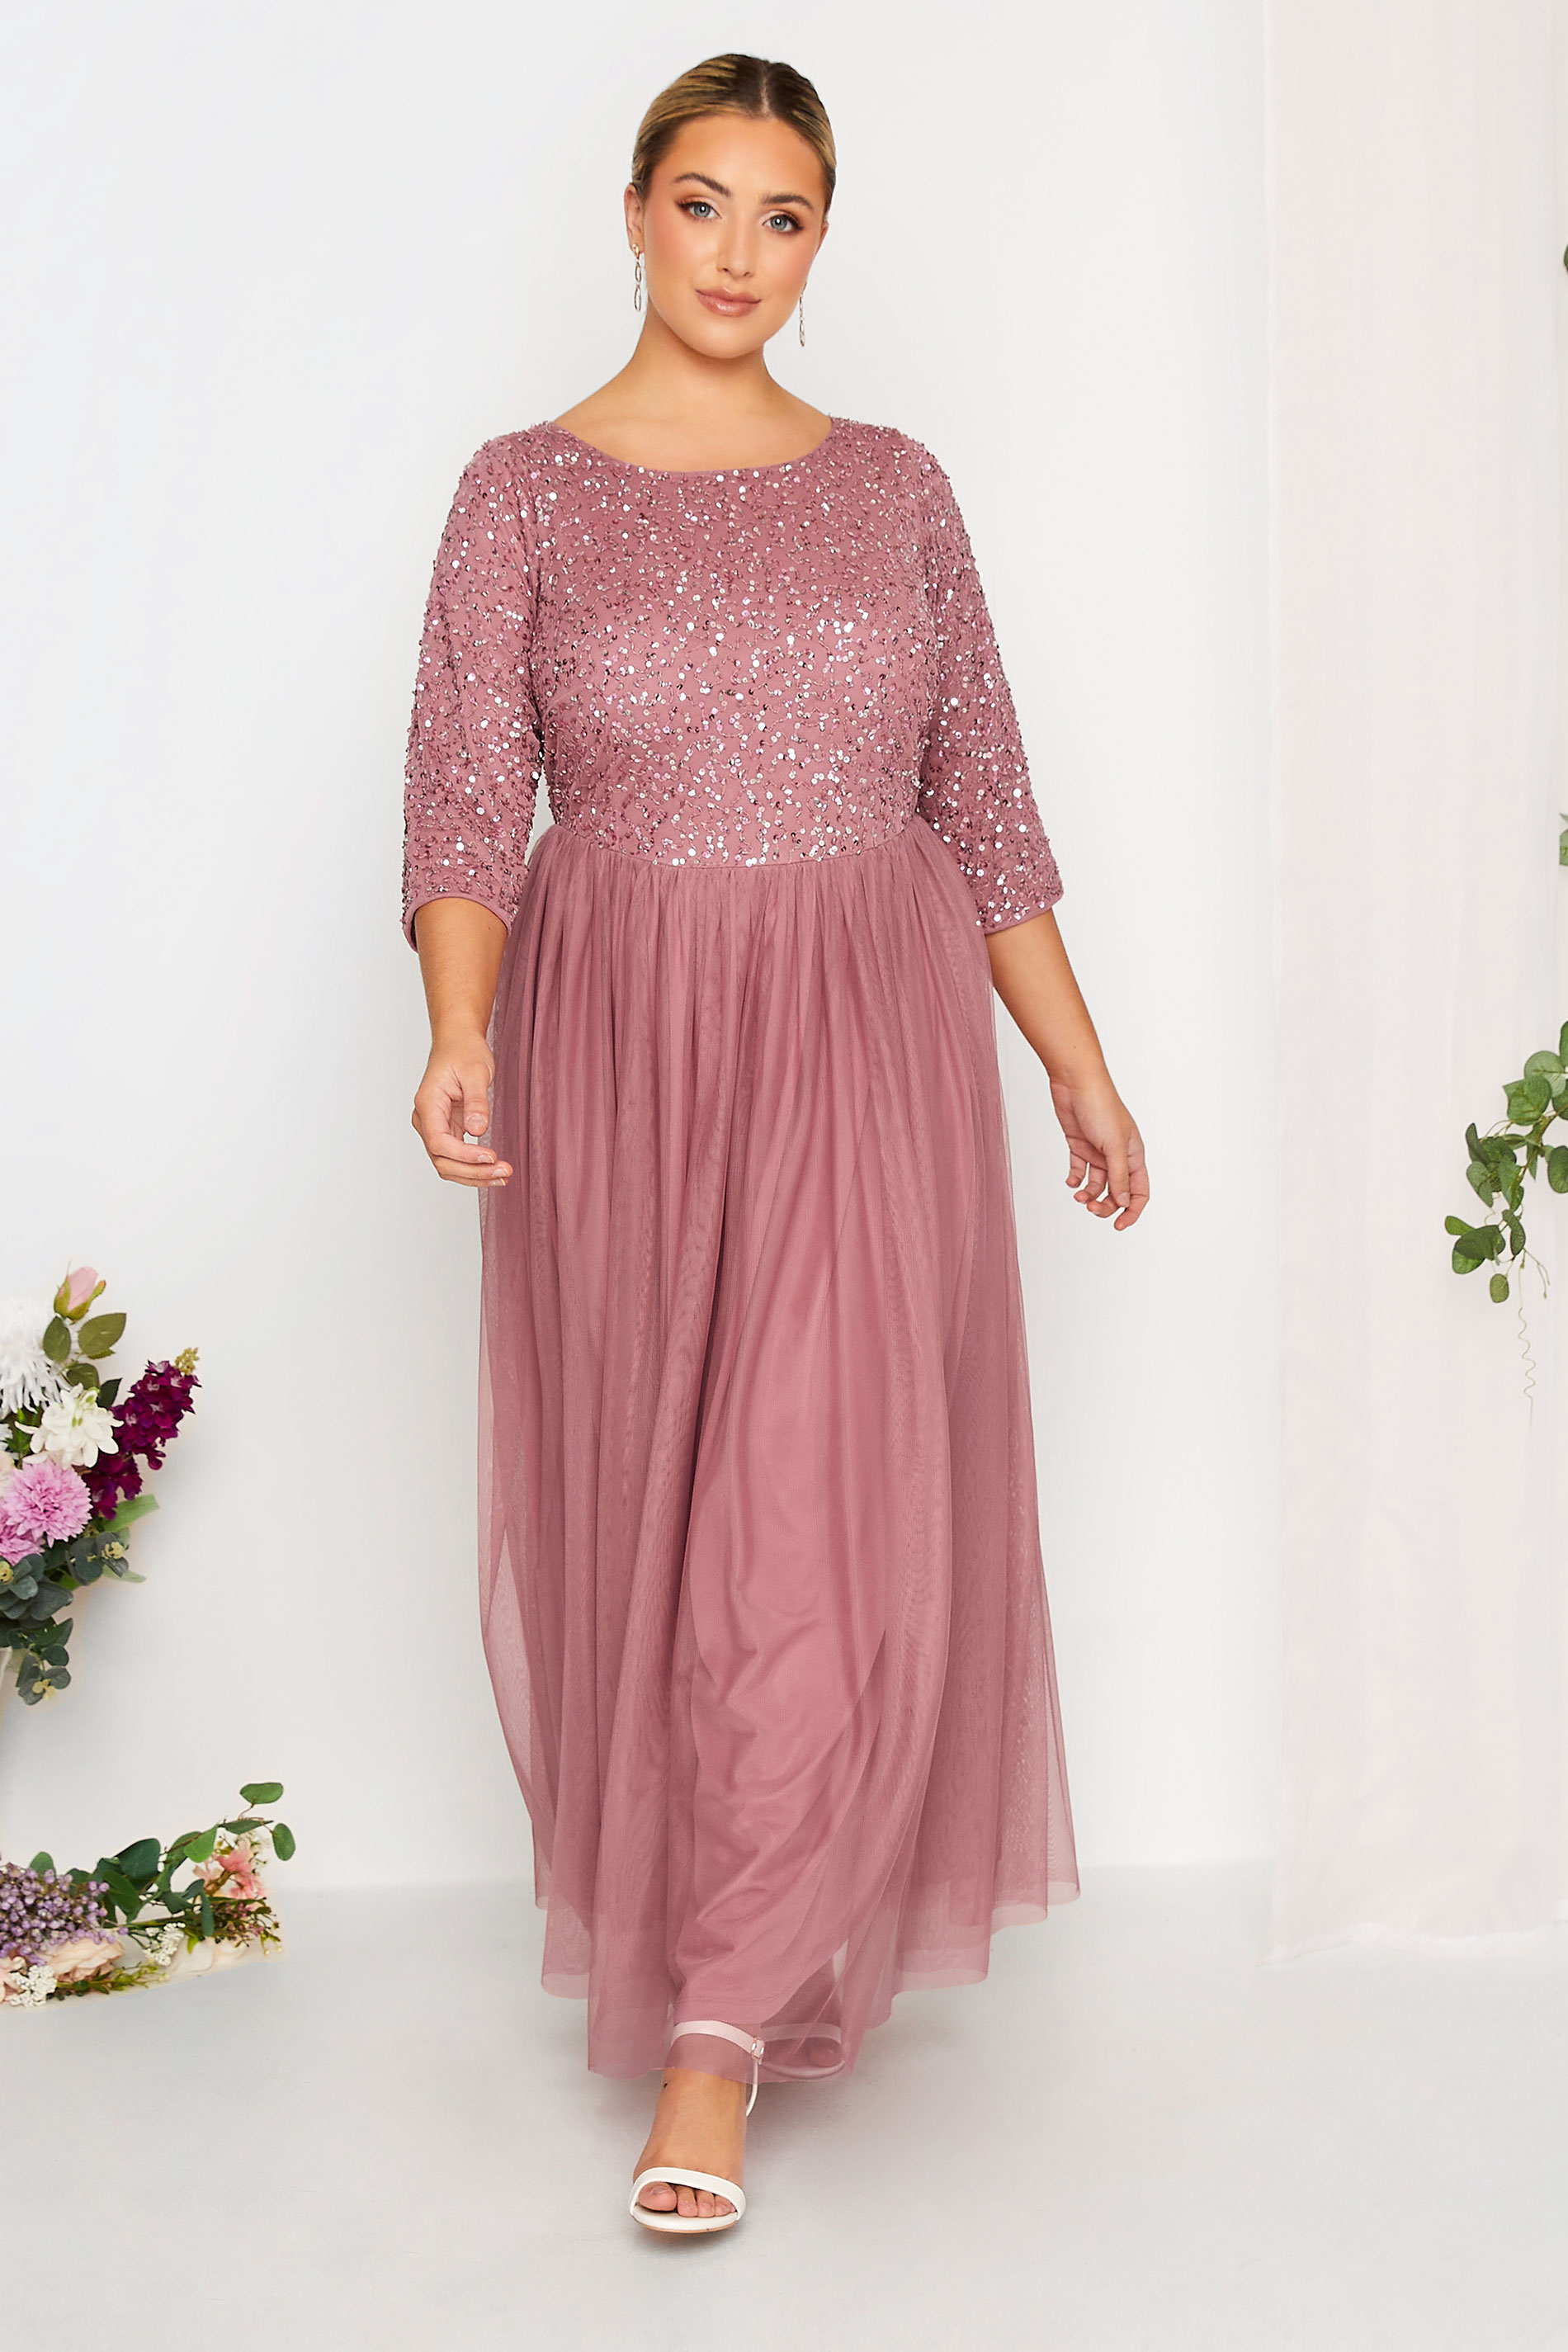 LUXE Plus Size Dark Pink Sequin Hand Embellished Maxi Dress | Yours Clothing  1